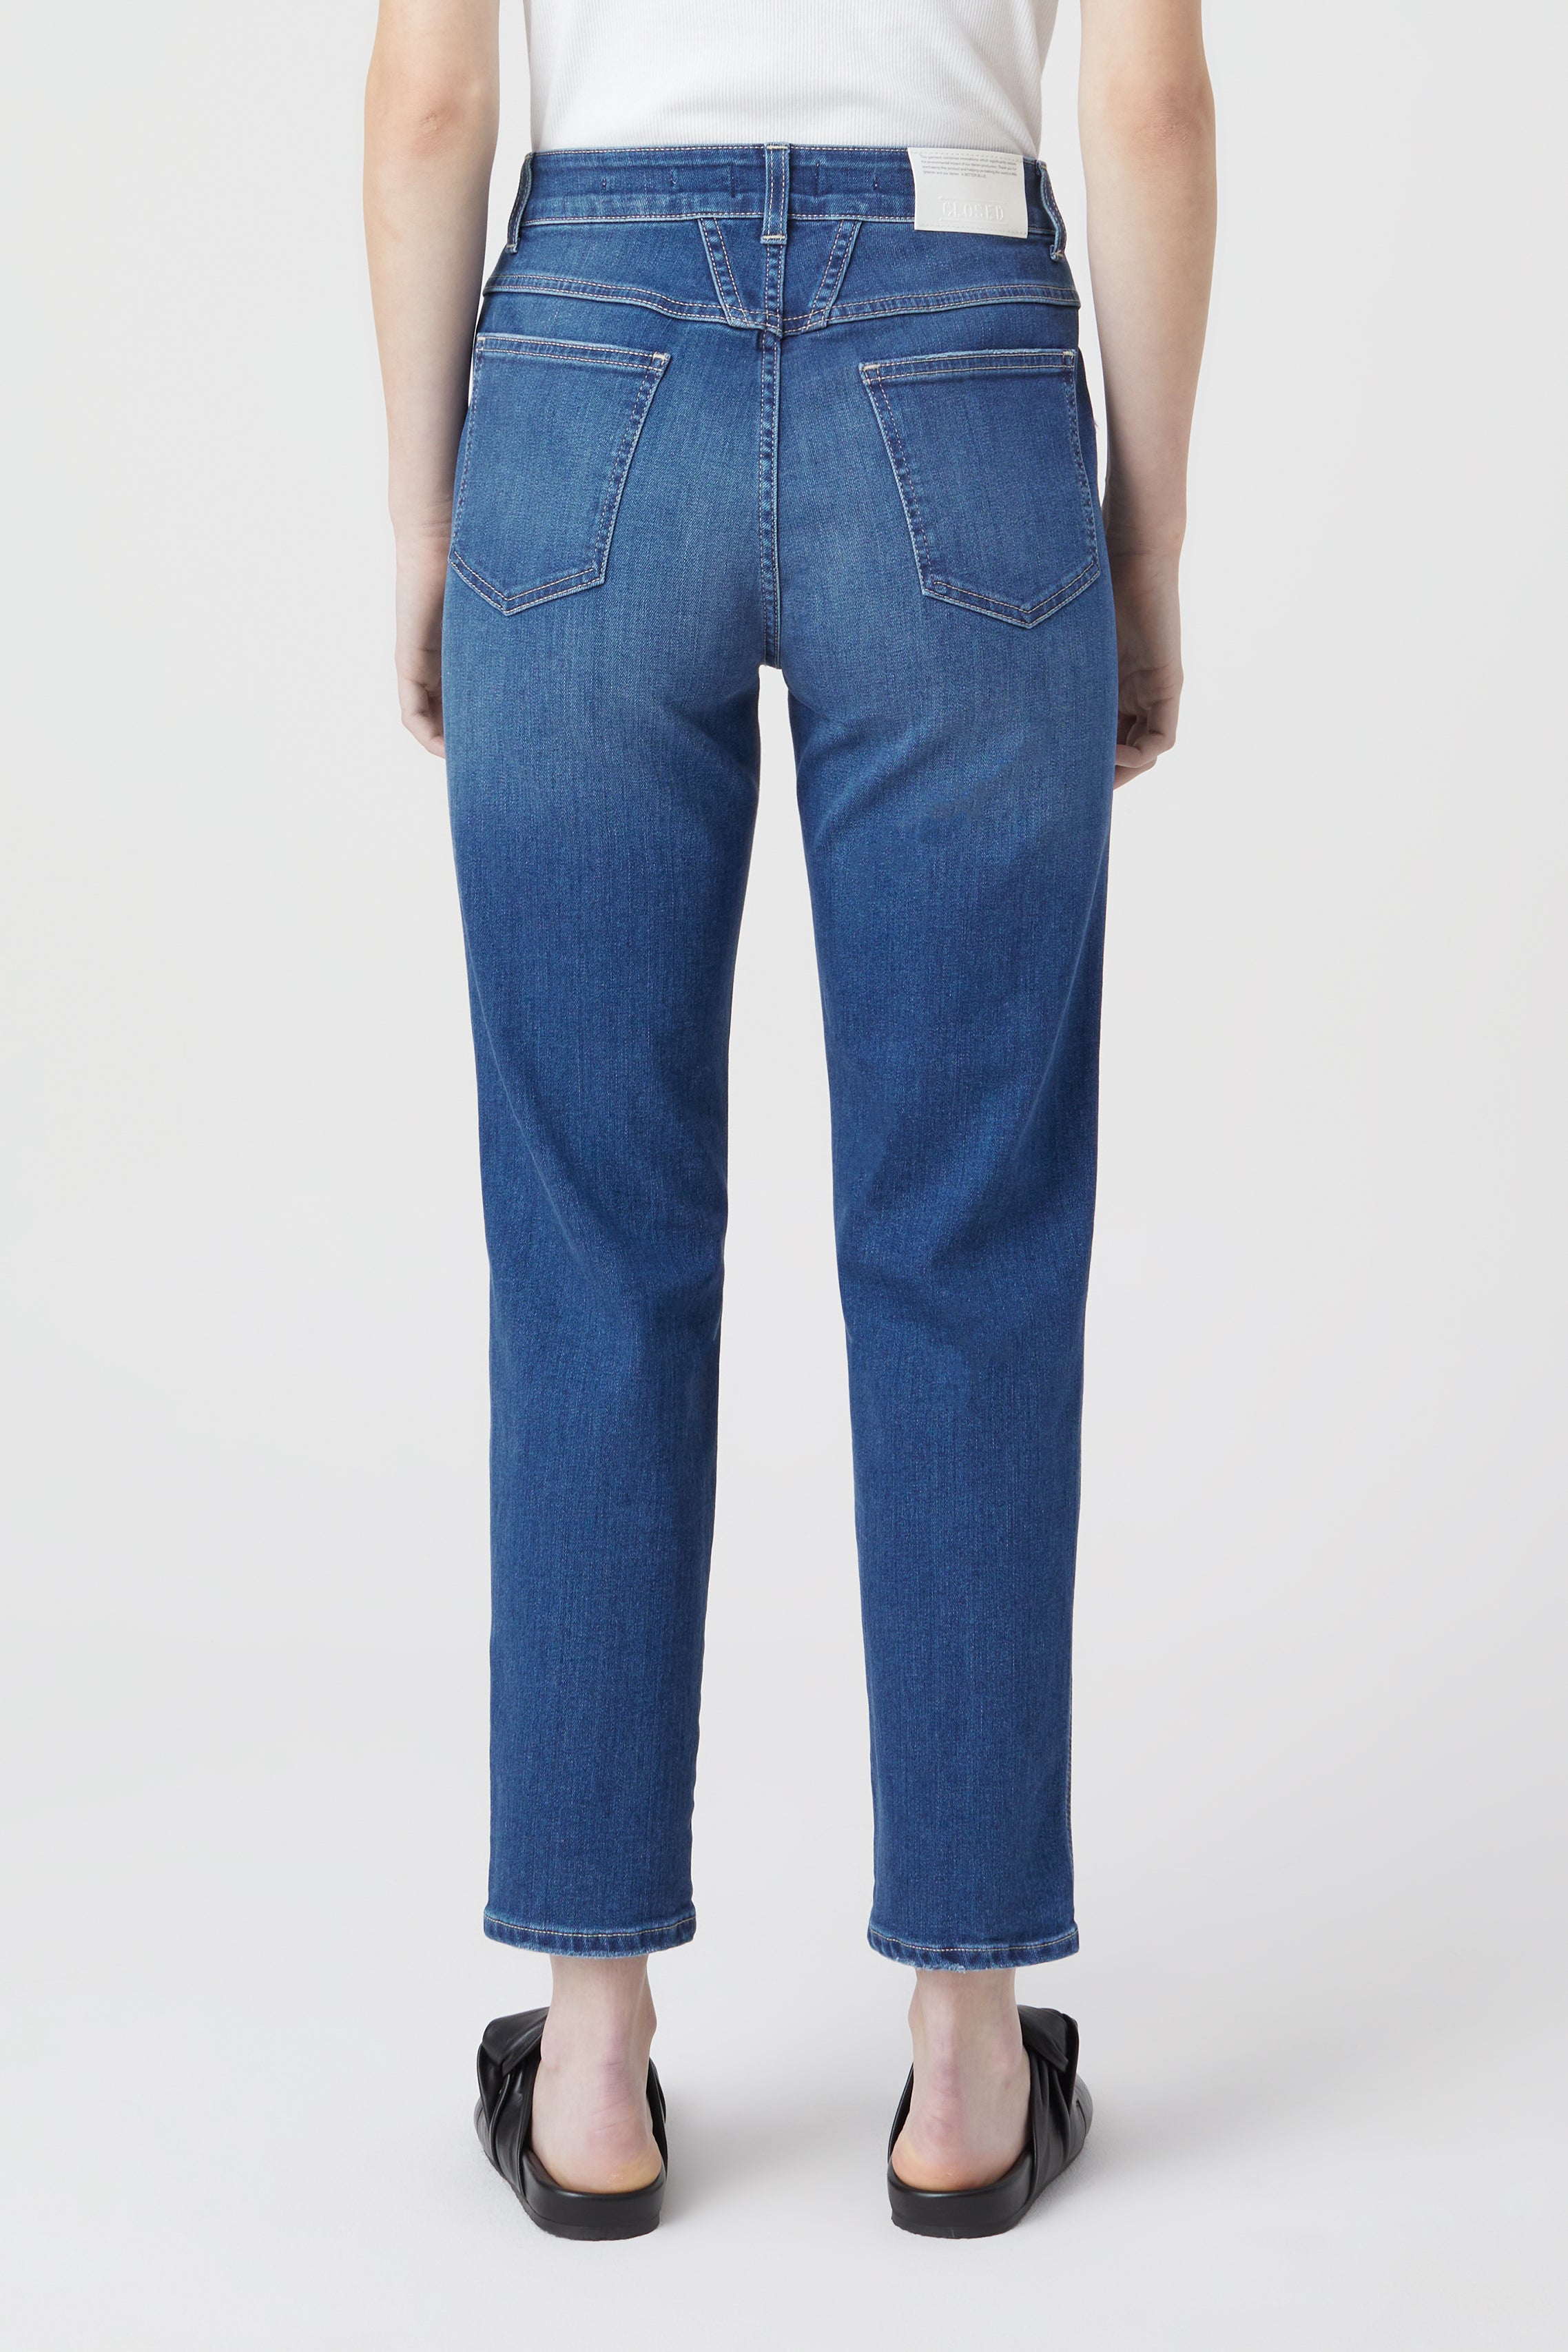 STYLE NAME PEDAL PUSHER JEANS